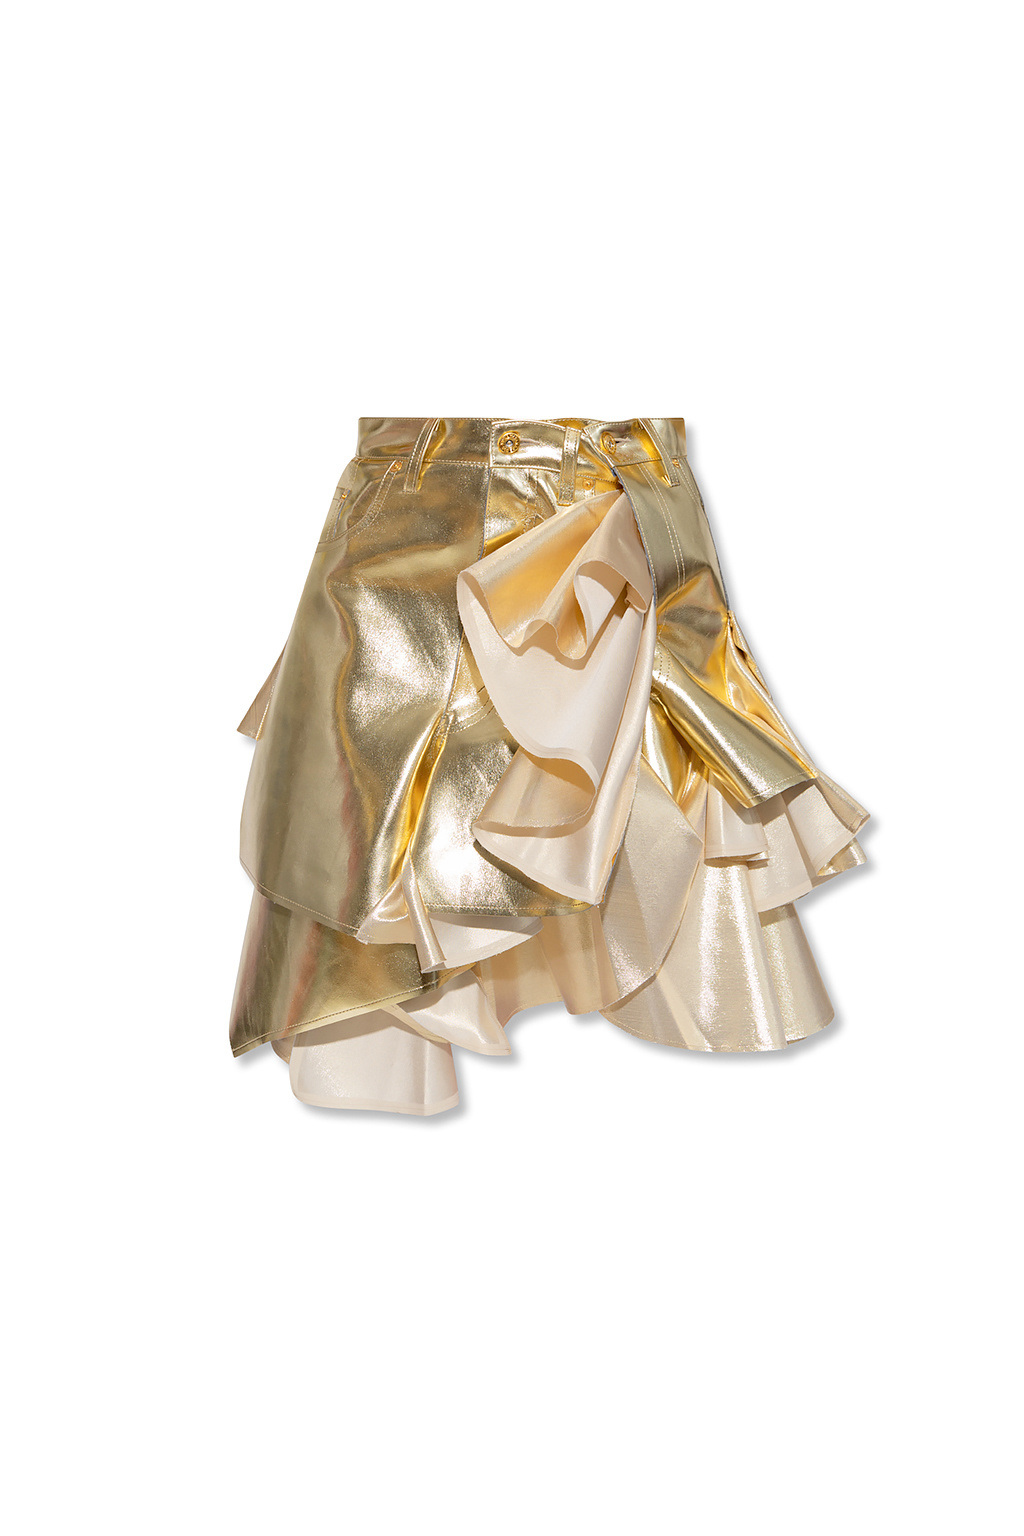 that combines music, art and fashion Asymmetric skirt